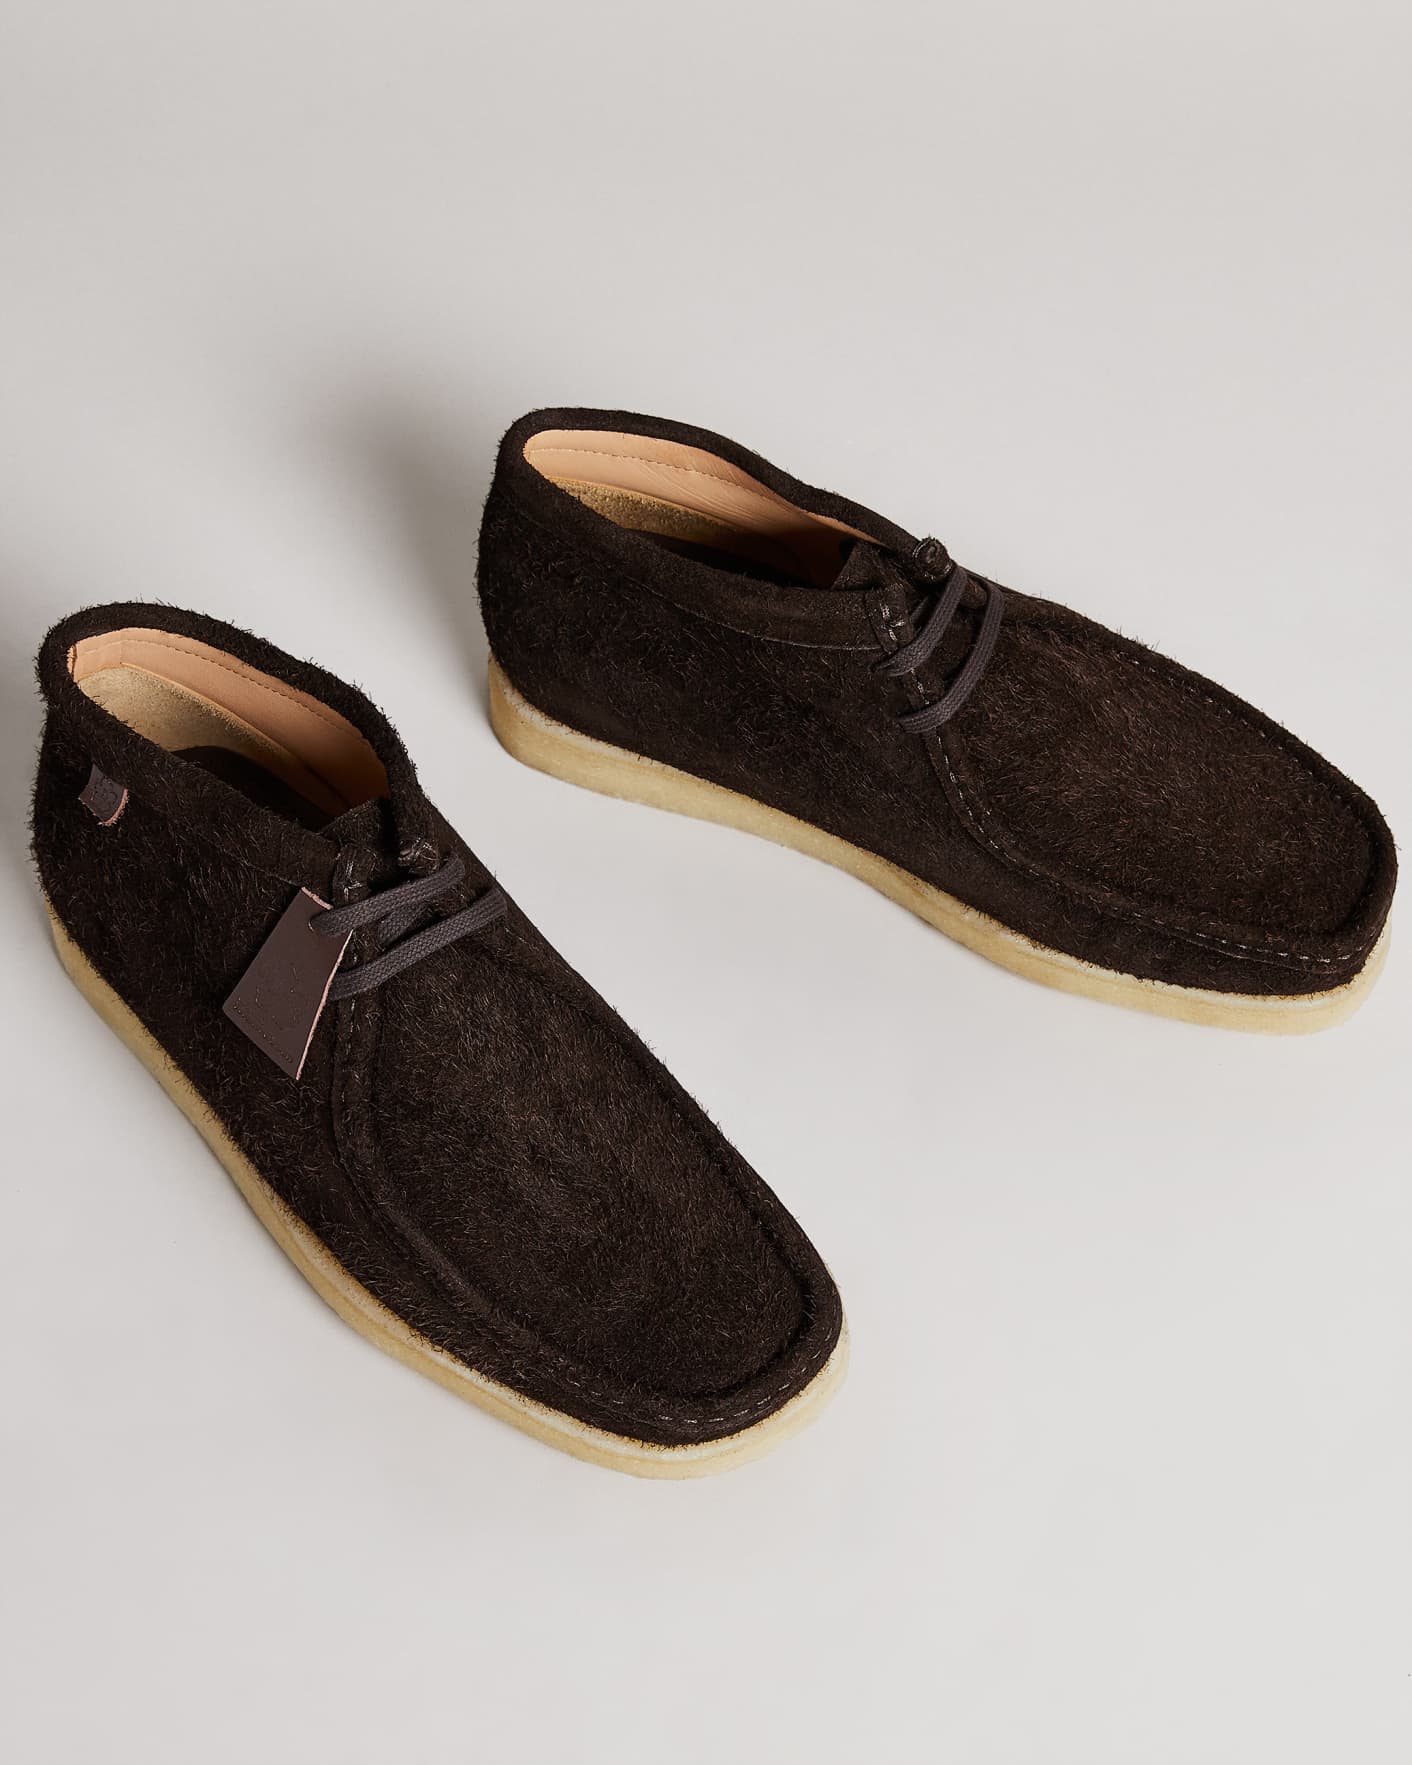 Brown-Chocolate Padmore & Barnes Moccasin Boot Ted Baker